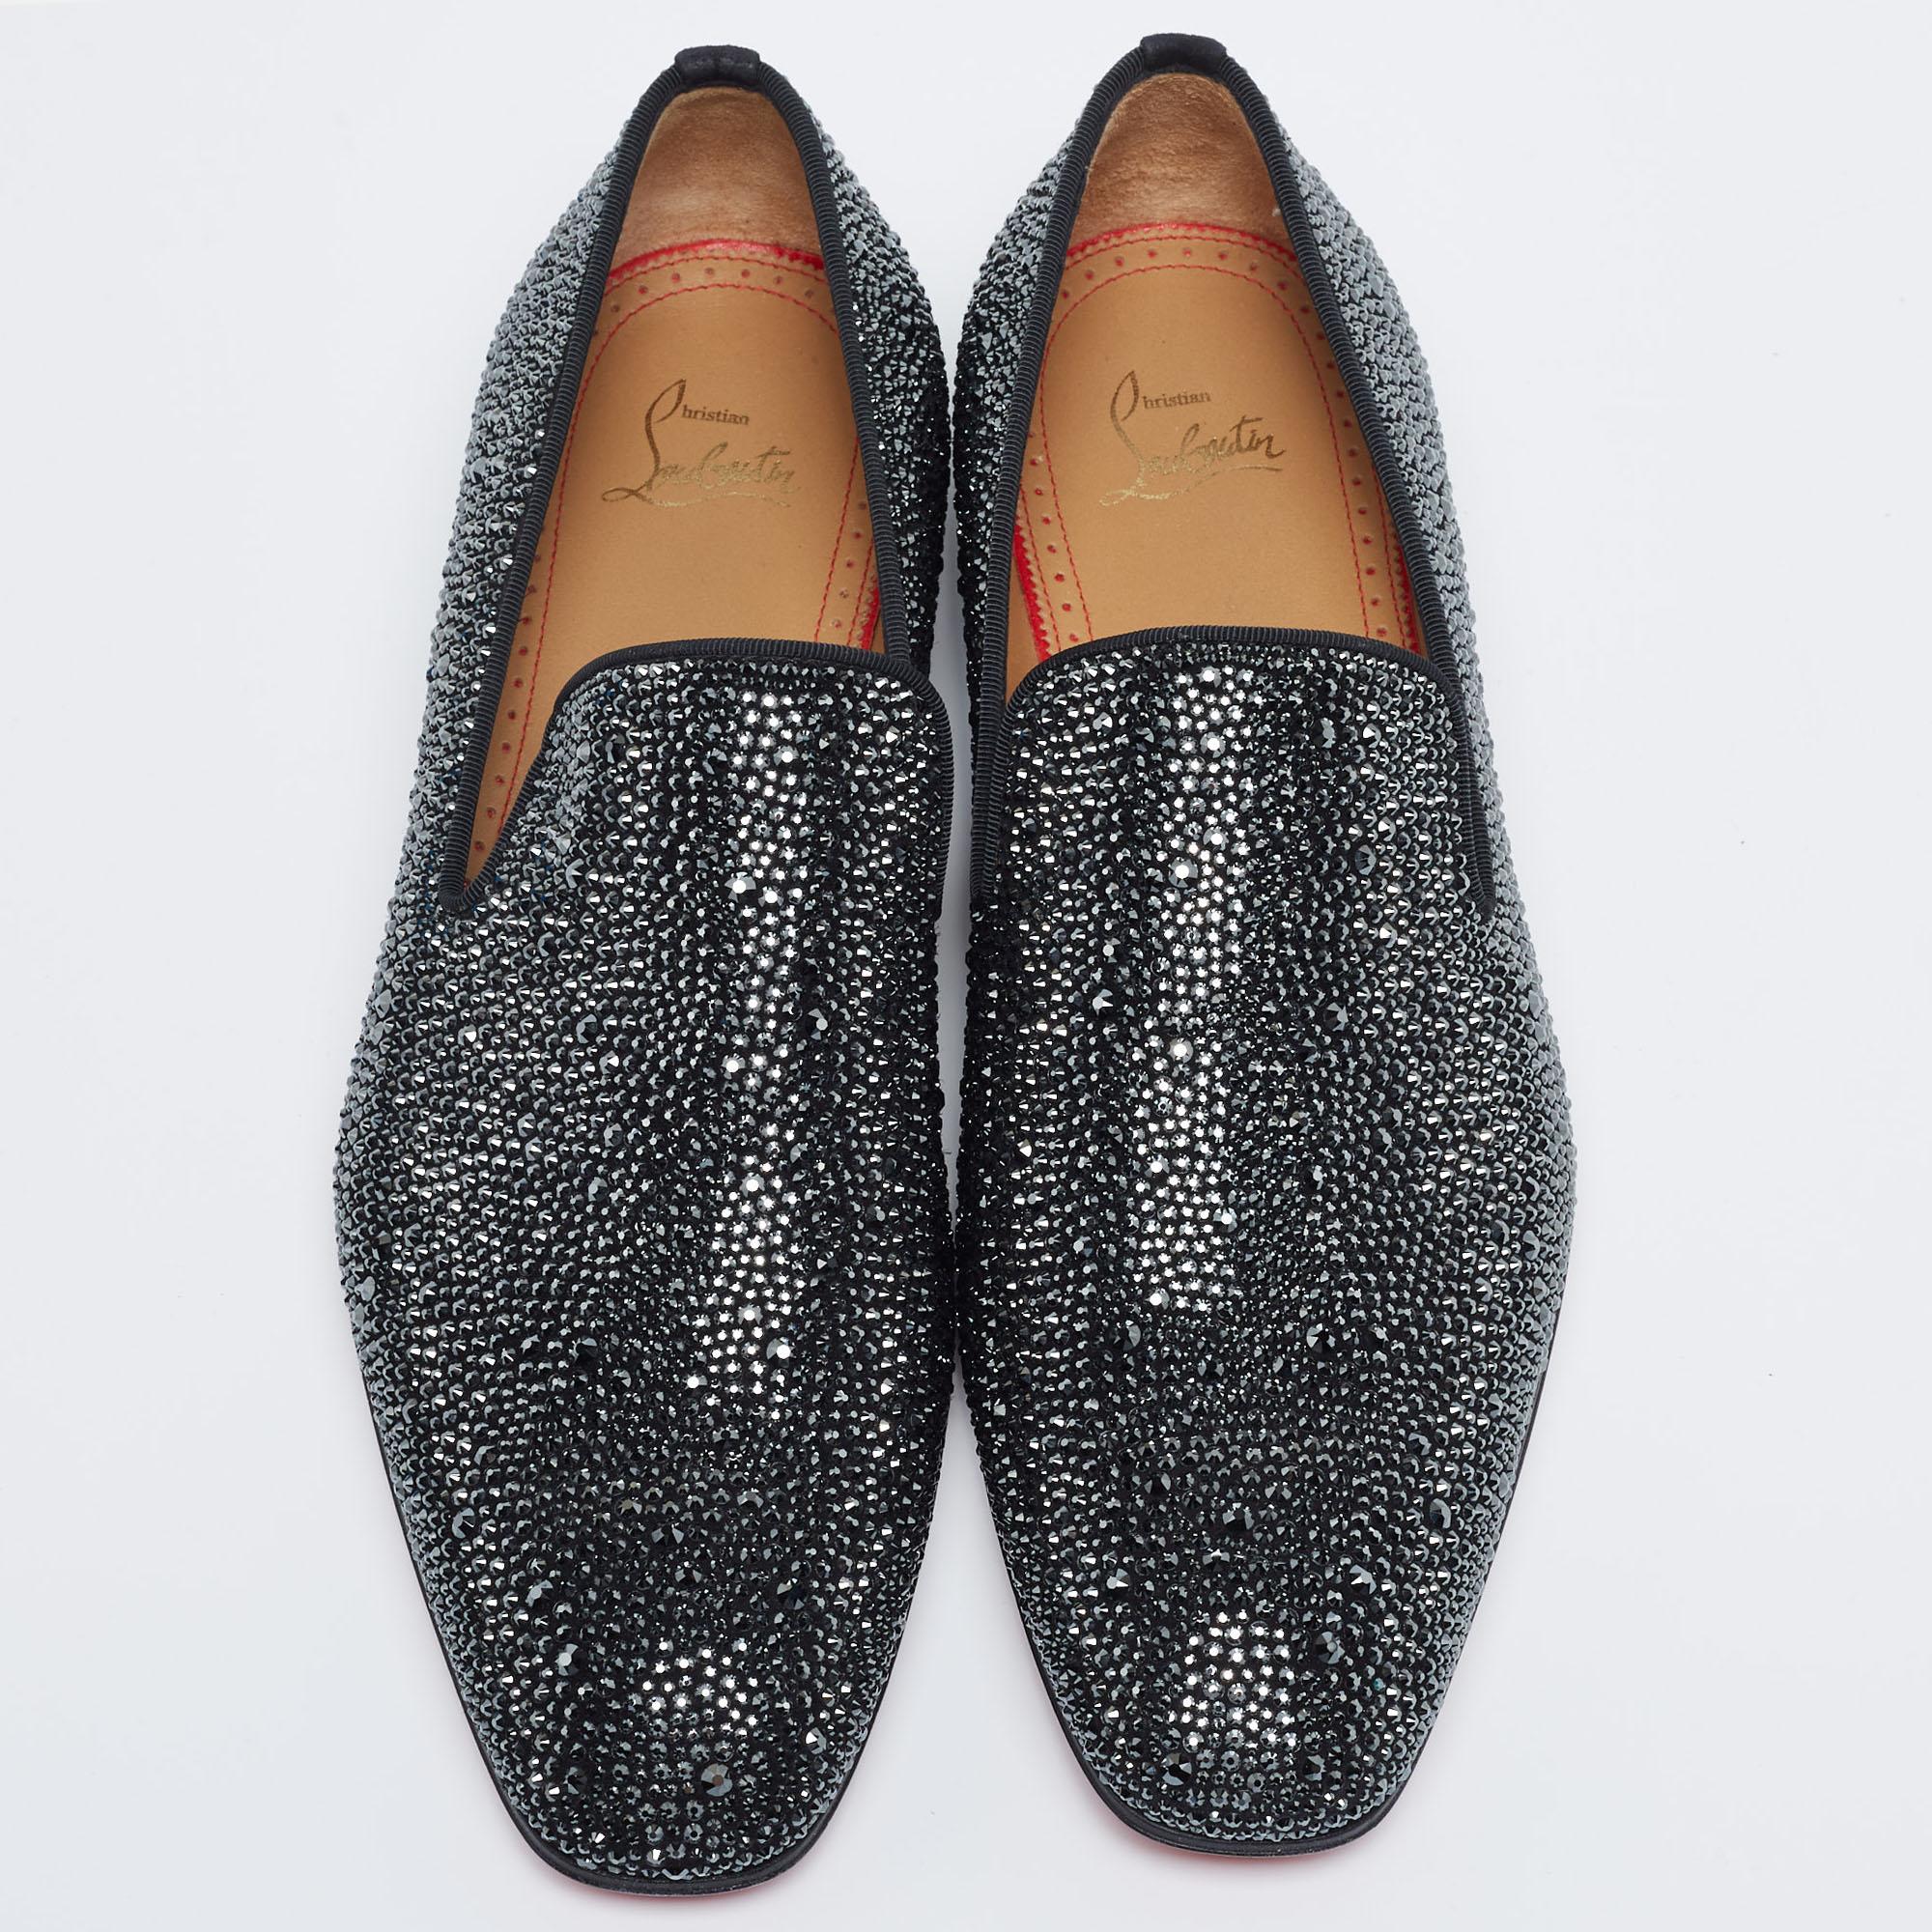 Make a fashionable entrance in these cool slippers from Christian Louboutin. They have been meticulously crafted from suede and have a striking black exterior decorated with strass embellishments all over. This pair is finished with leather insoles